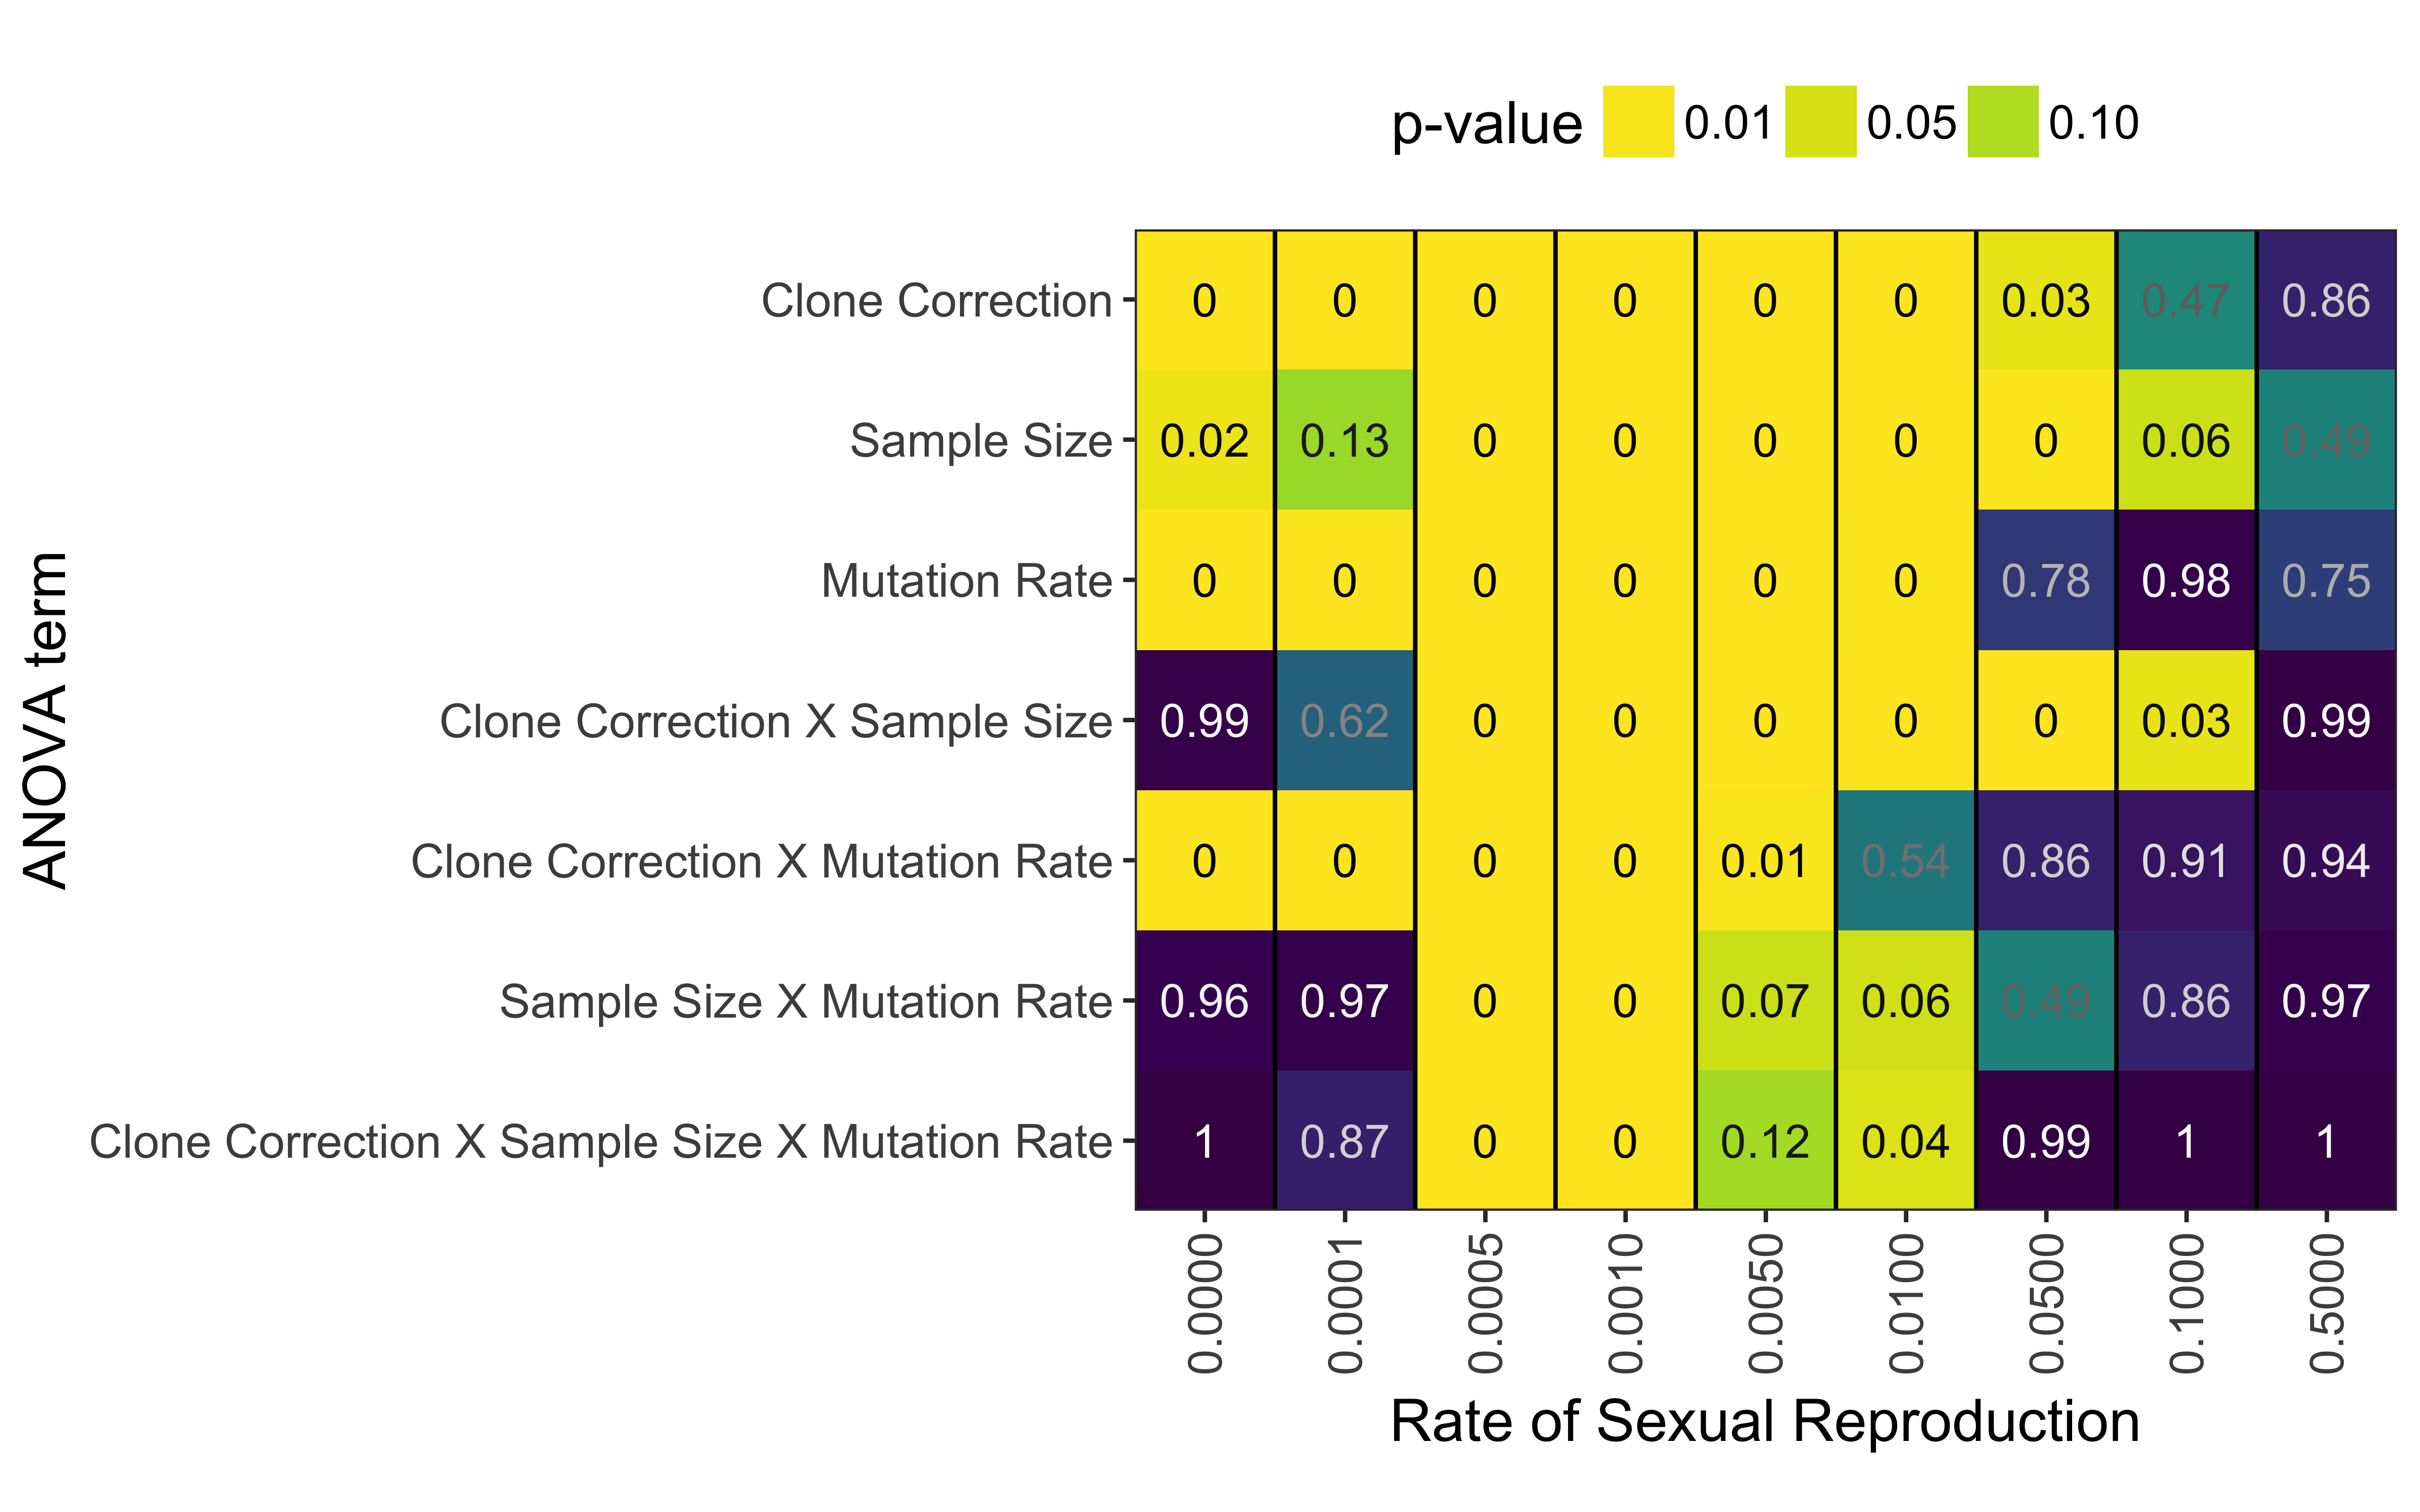 P-values from ANOVA analysis assessing AURC distributions with the model
$AURC \sim Clone Correction \times Sample Size \times Mutation Rate$ for
each rate of sexual reproduction, separately.